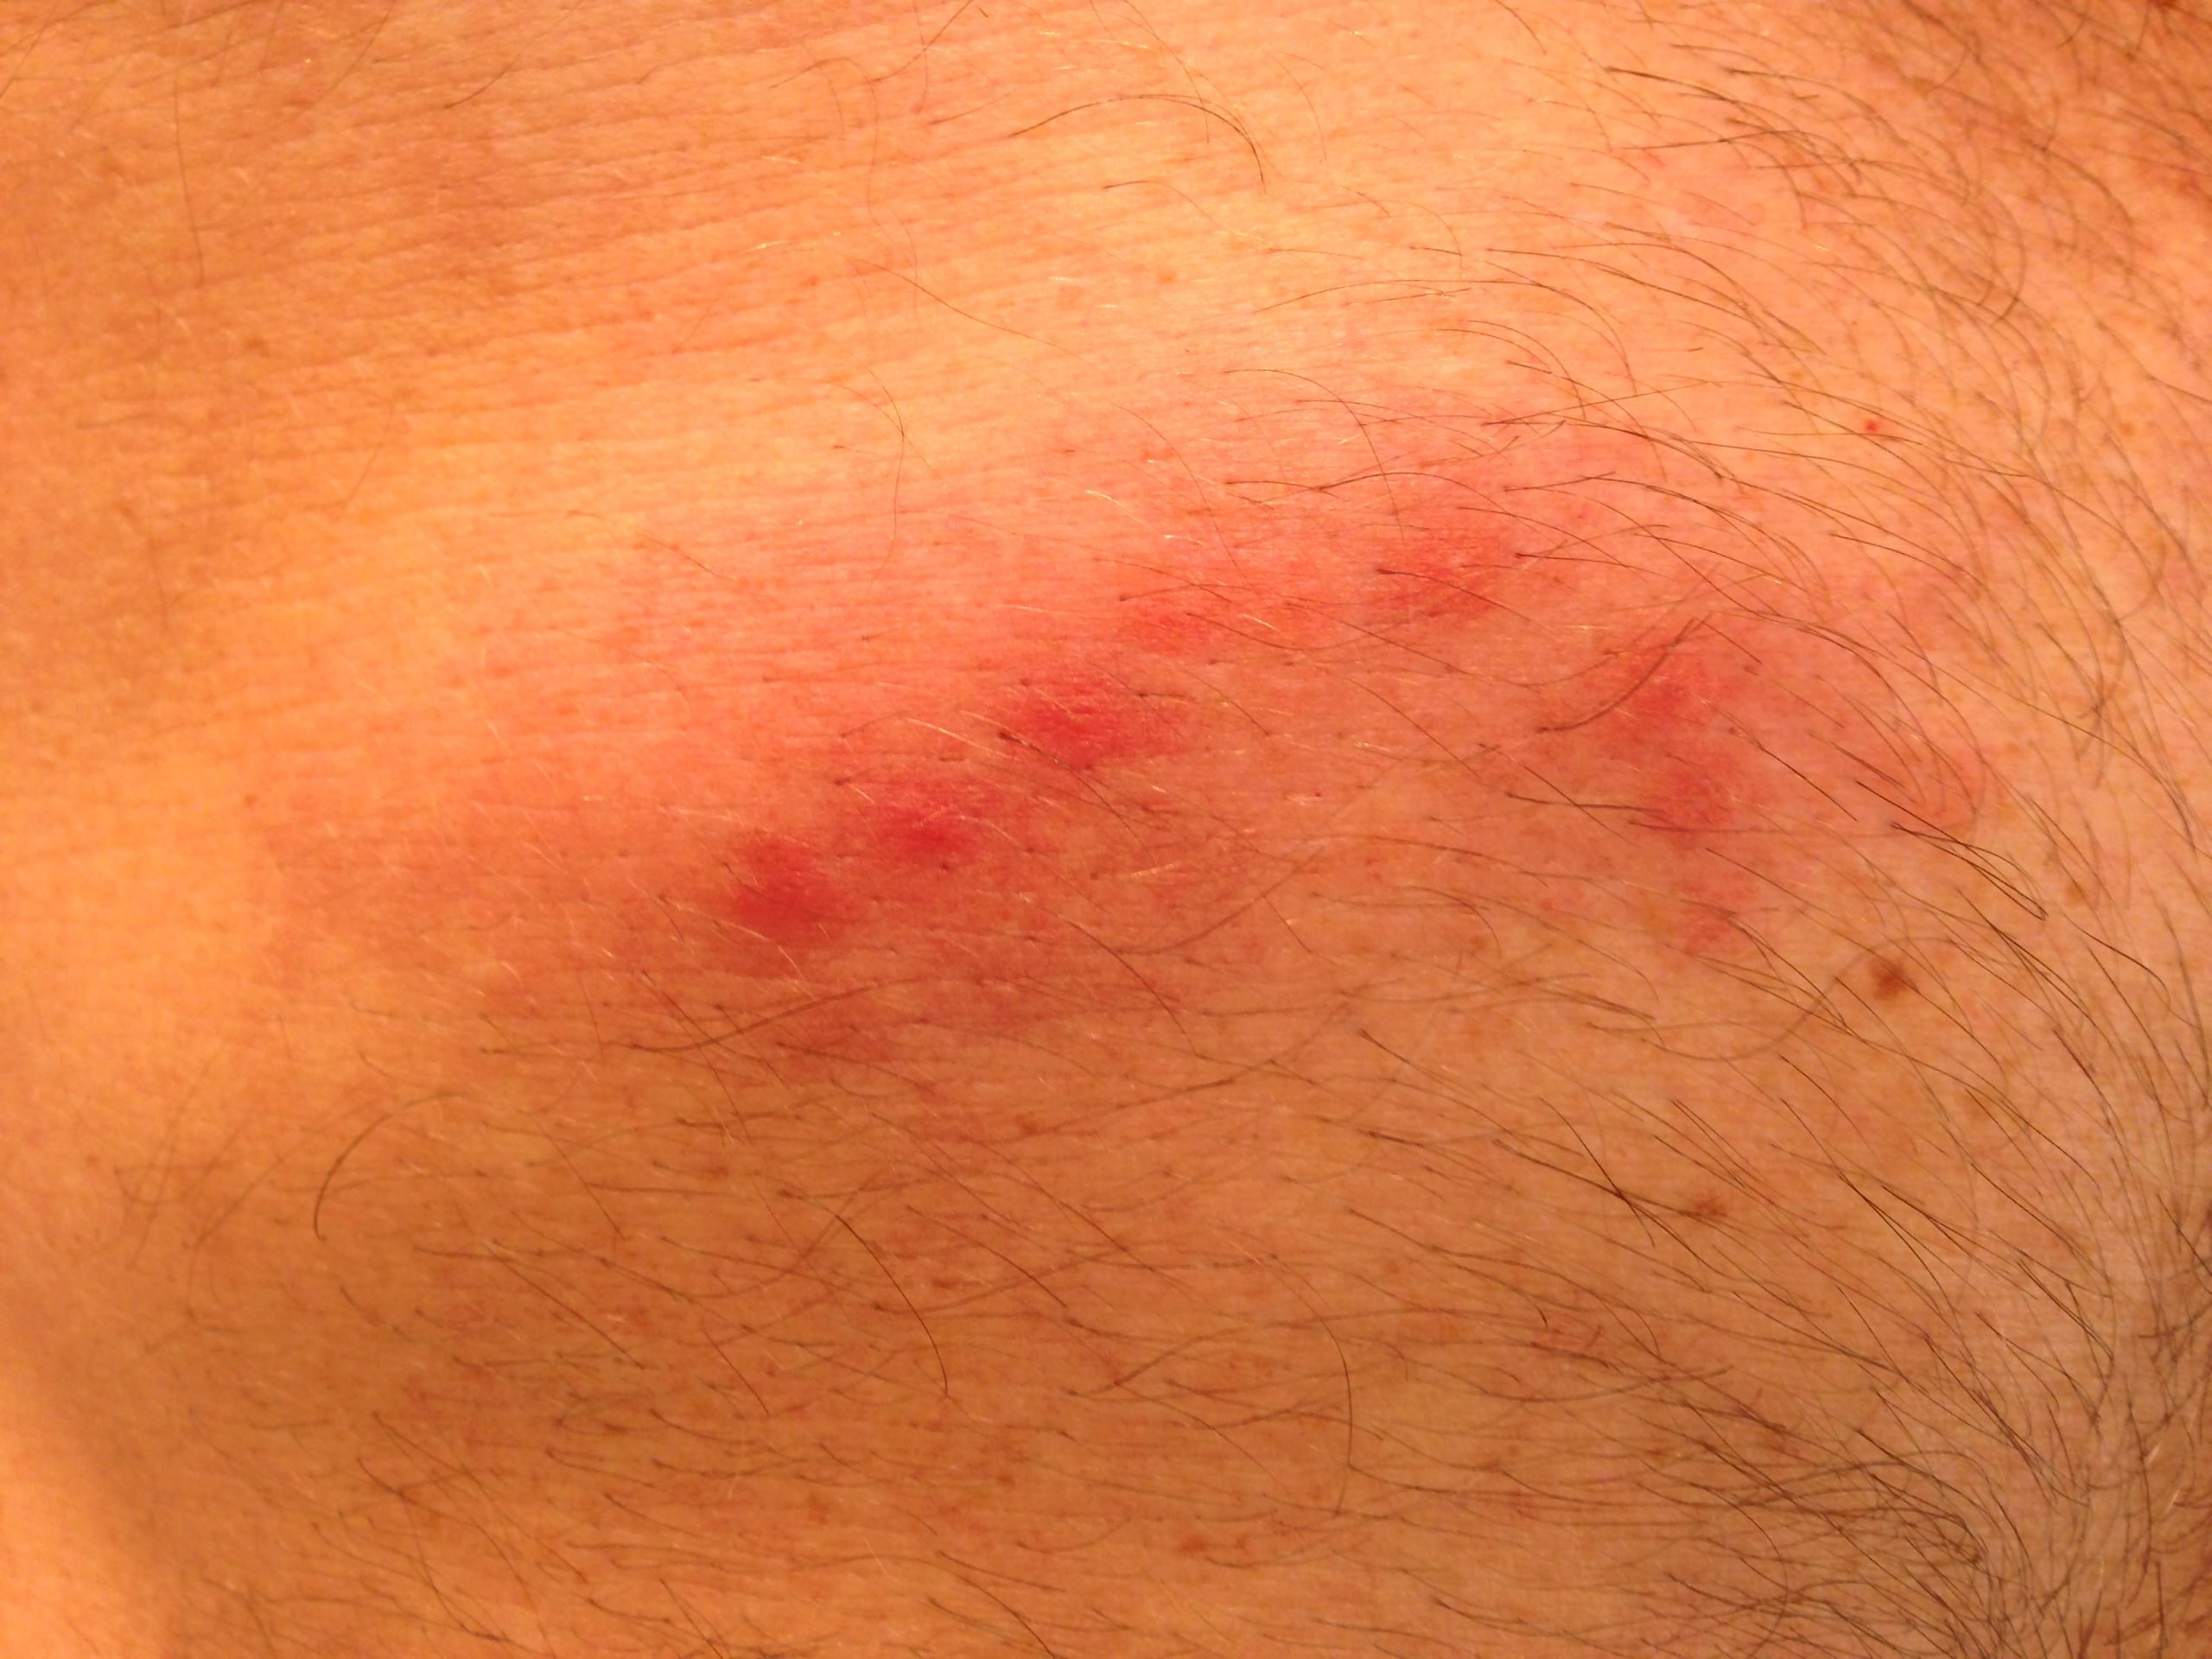 Can a summertime rash that looks like insect bites be something else ...